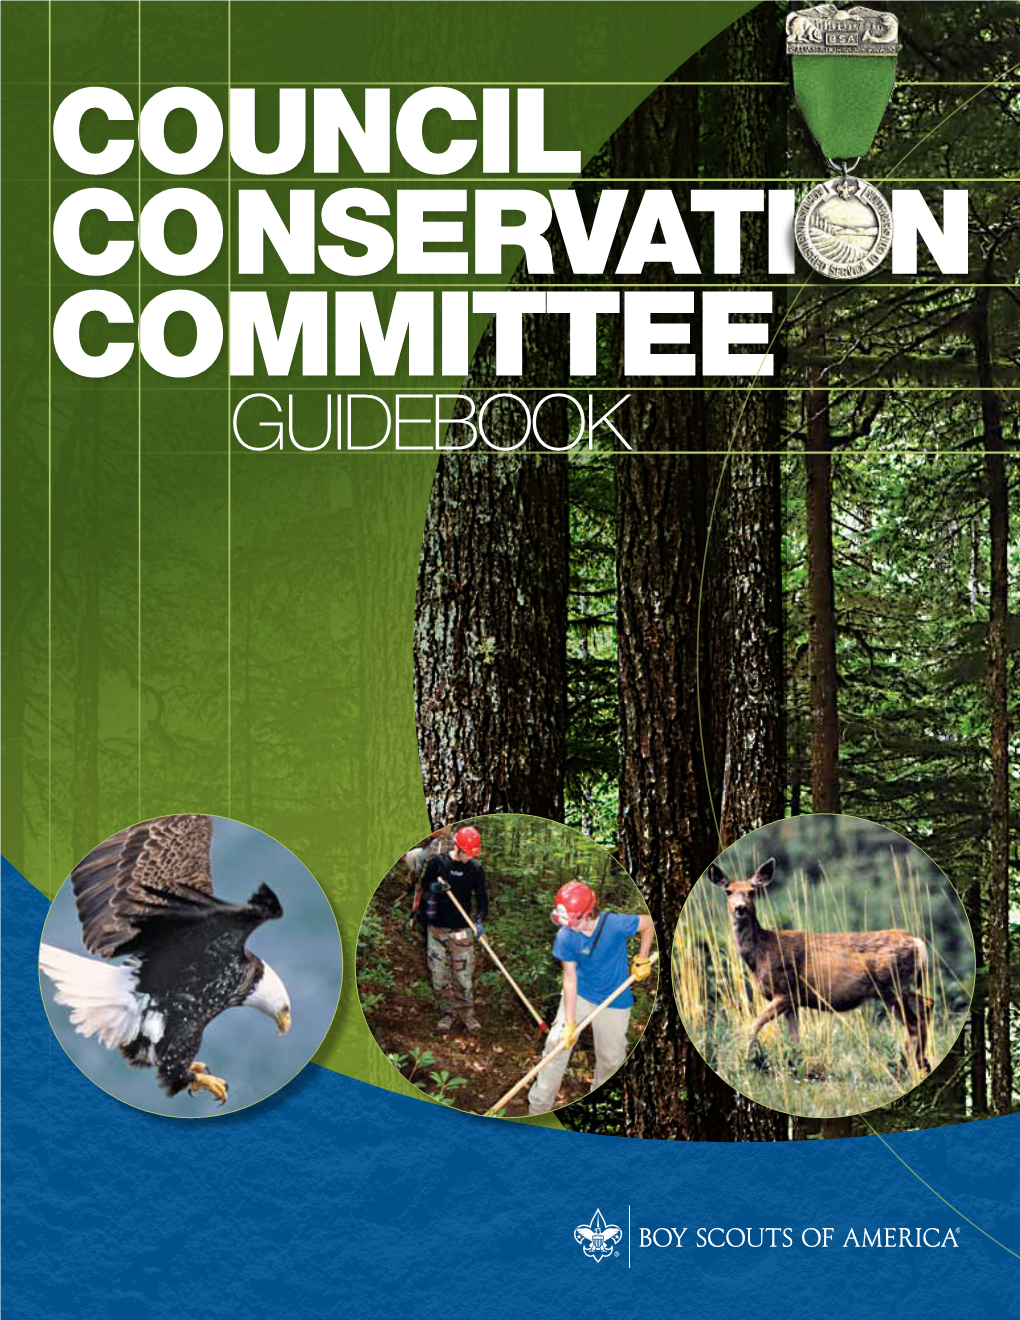 Council Conservation Committee Guidebook Council Conservation Committee Guidebook